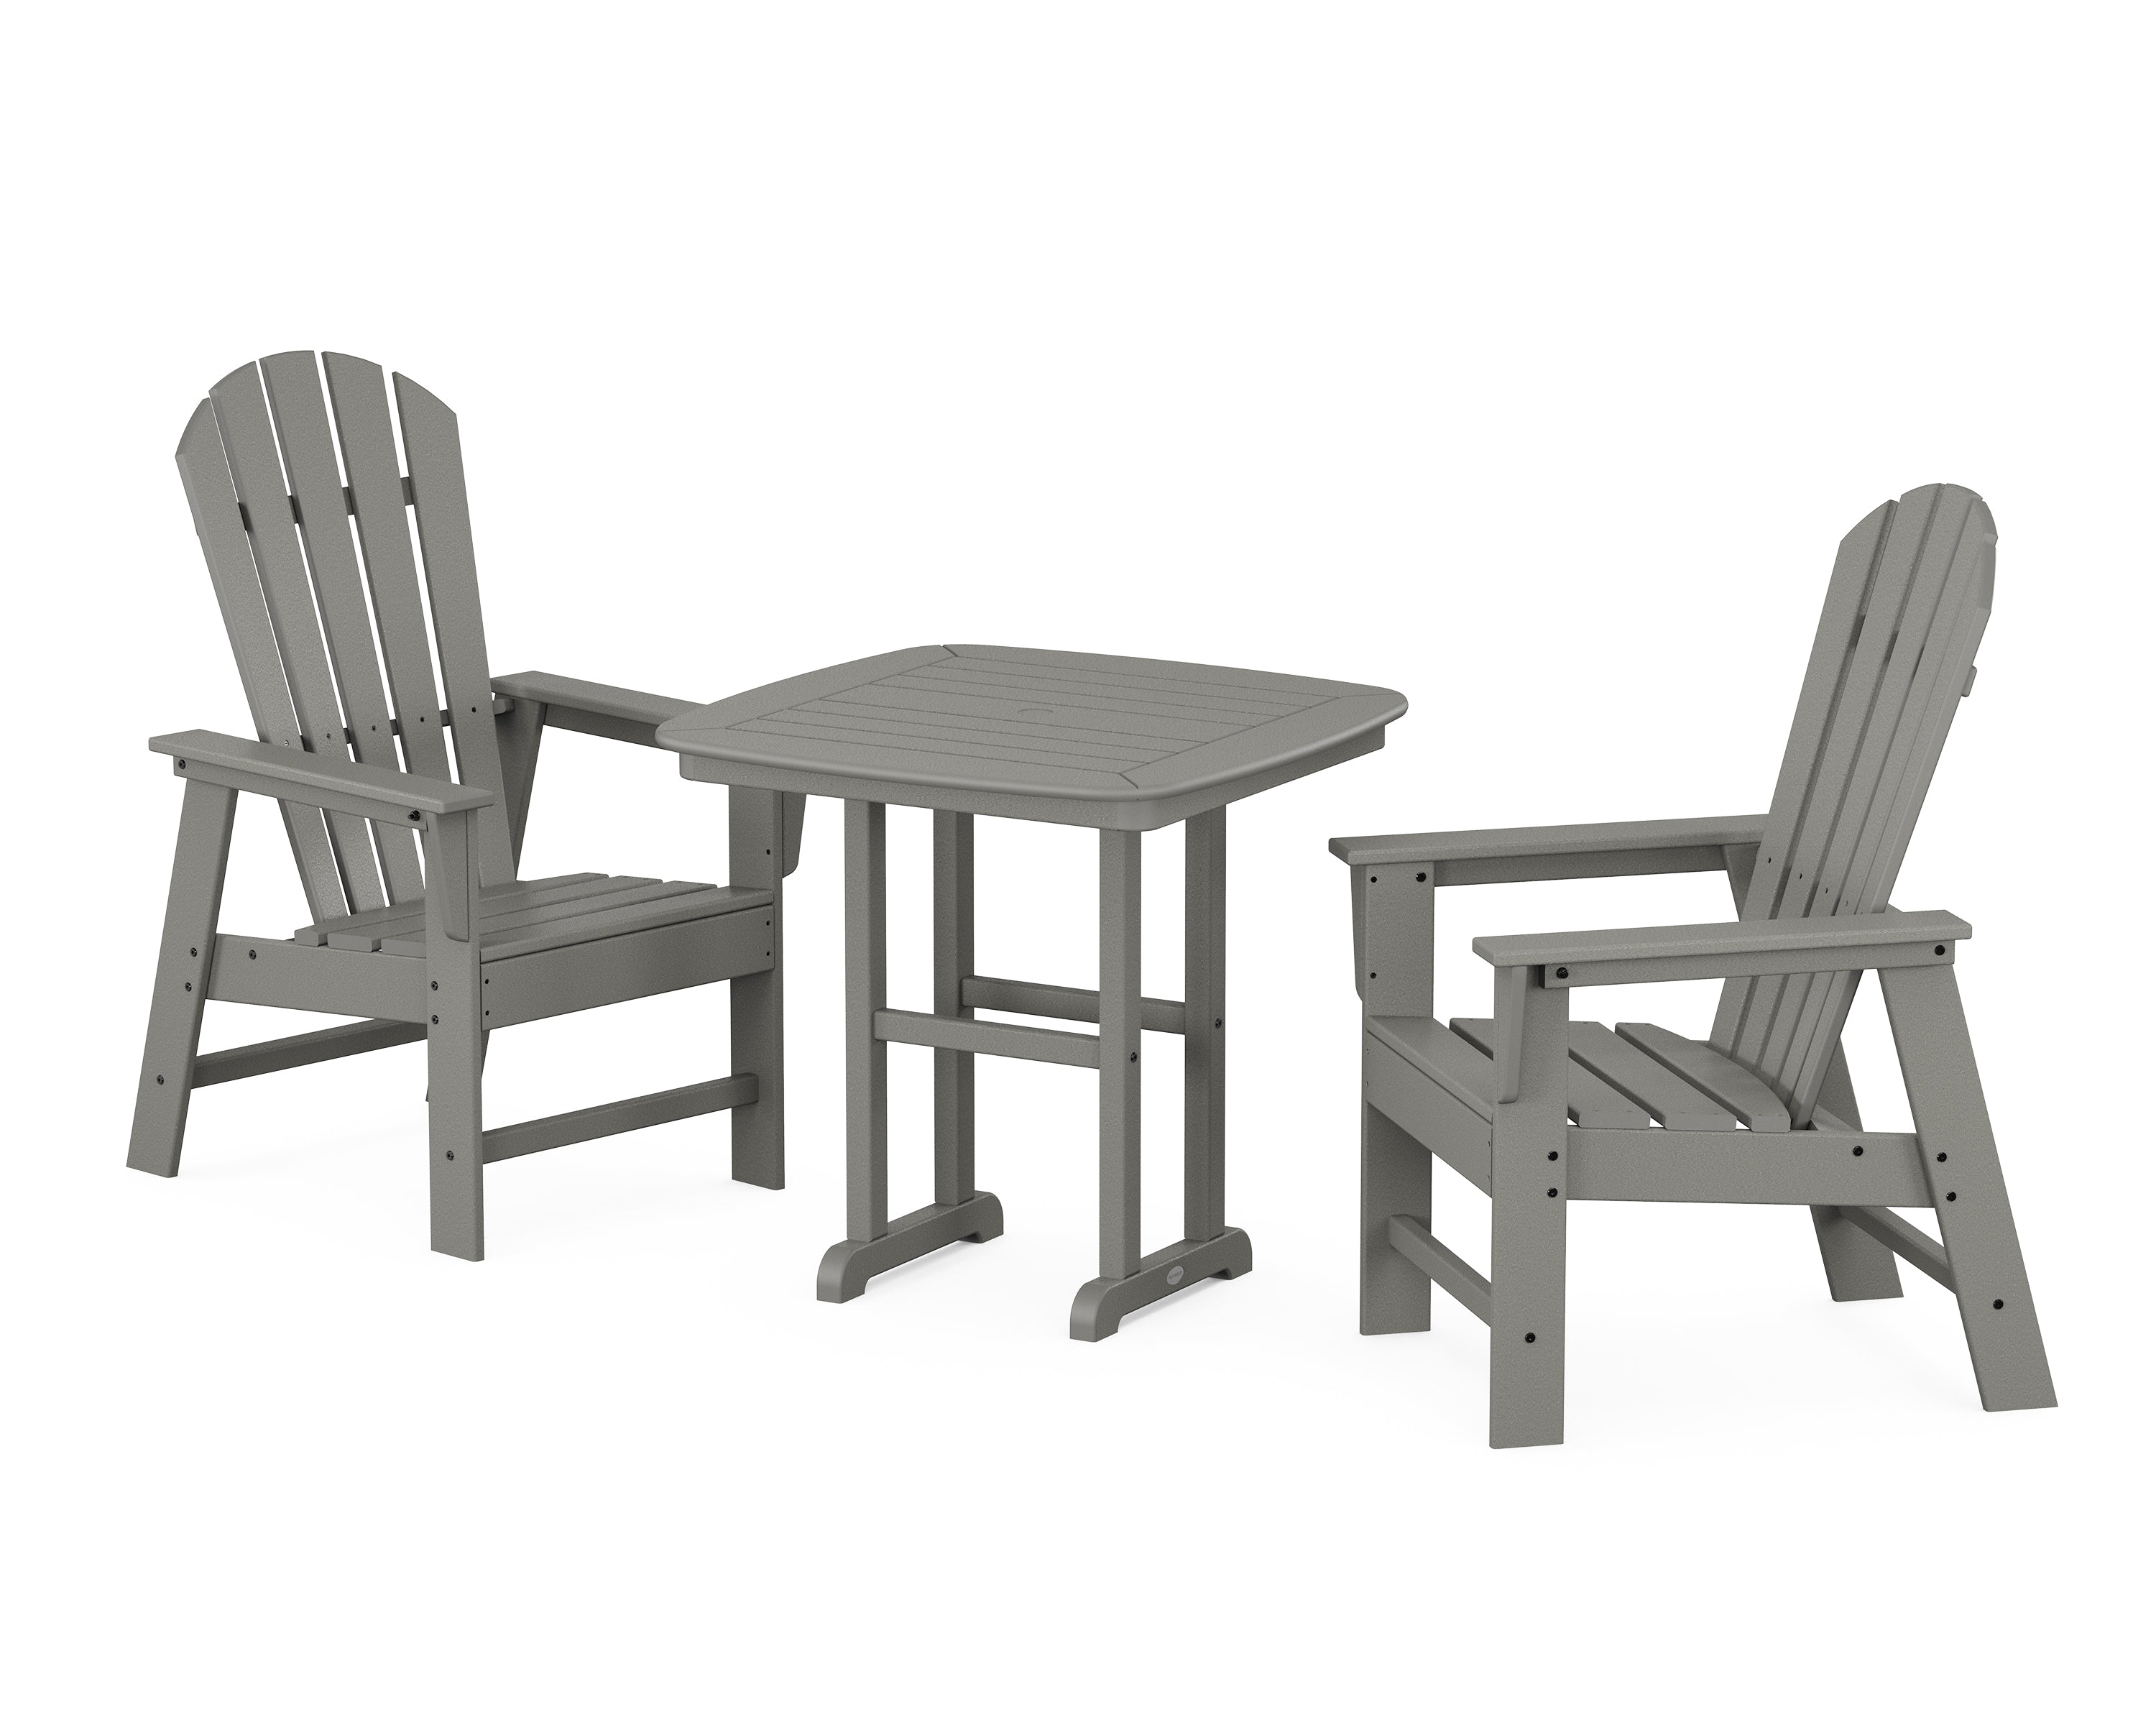 POLYWOOD® South Beach 3-Piece Dining Set in Slate Grey